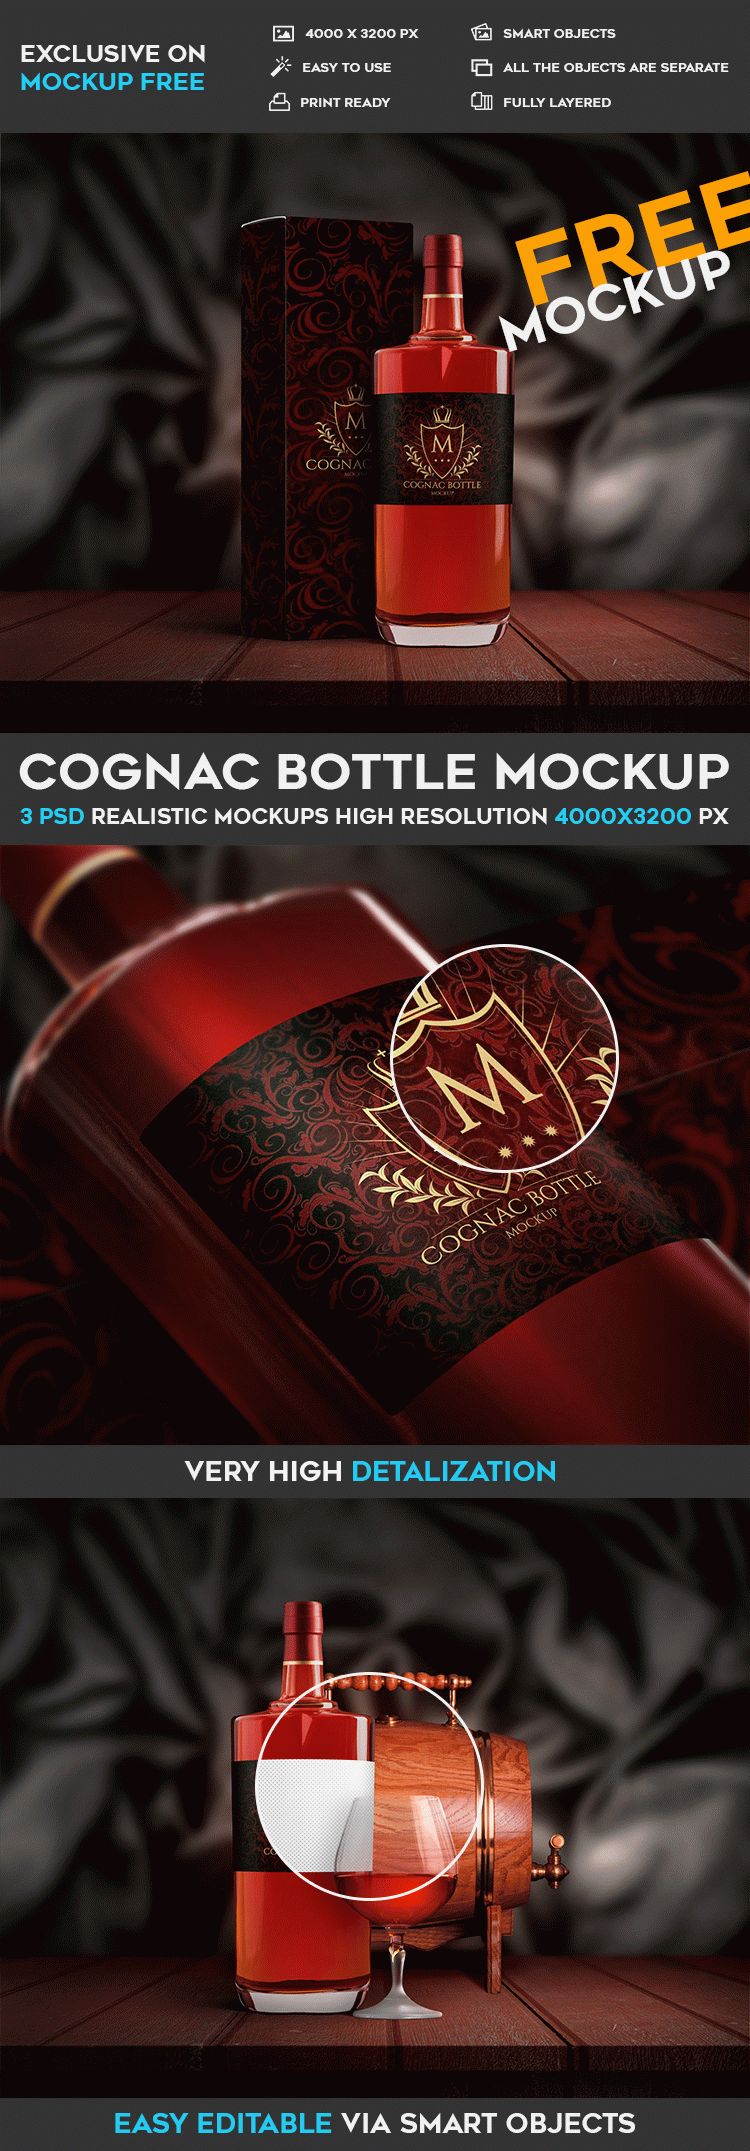 bigpreview_cognac-bottle-mockup-template-free-in-psd